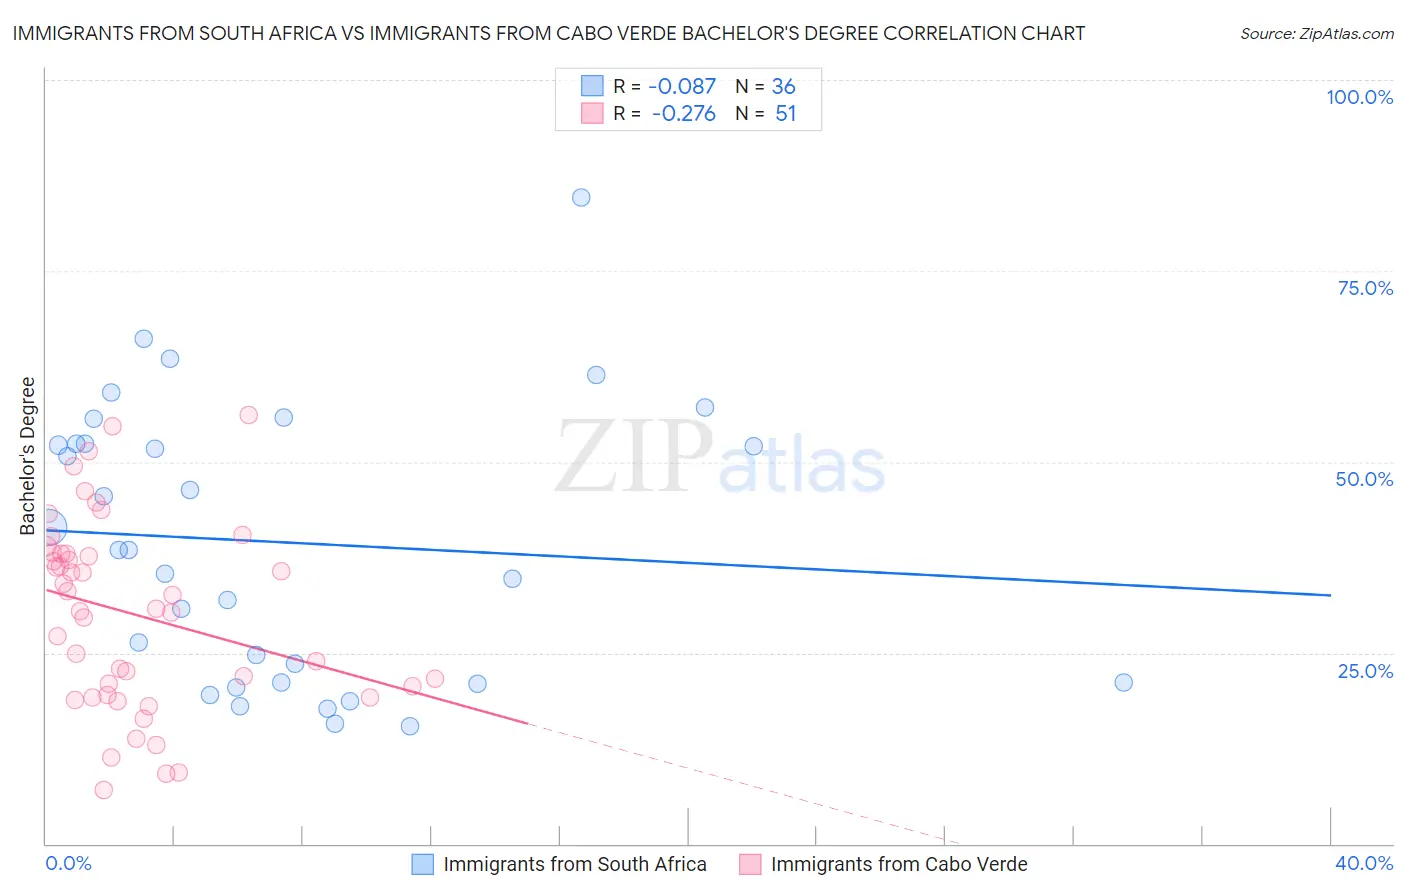 Immigrants from South Africa vs Immigrants from Cabo Verde Bachelor's Degree